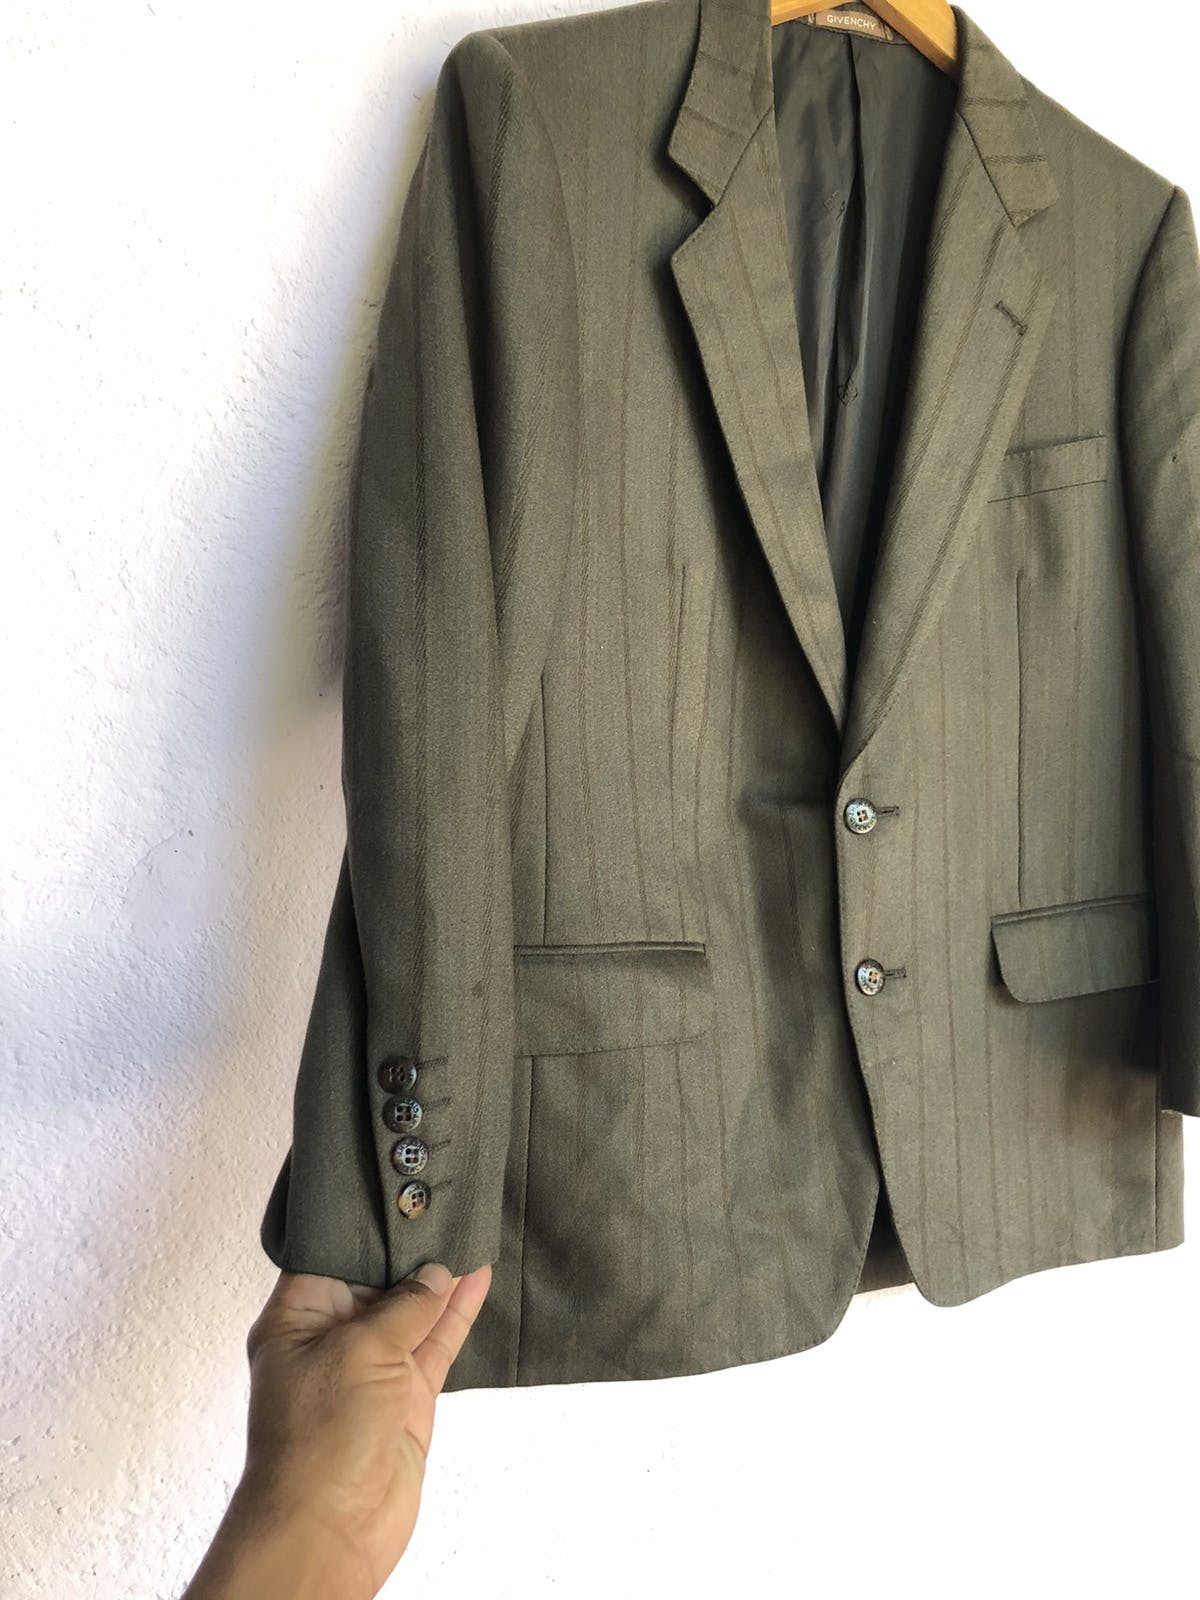 Givenchy Men’s tailored jackets good condition - 3